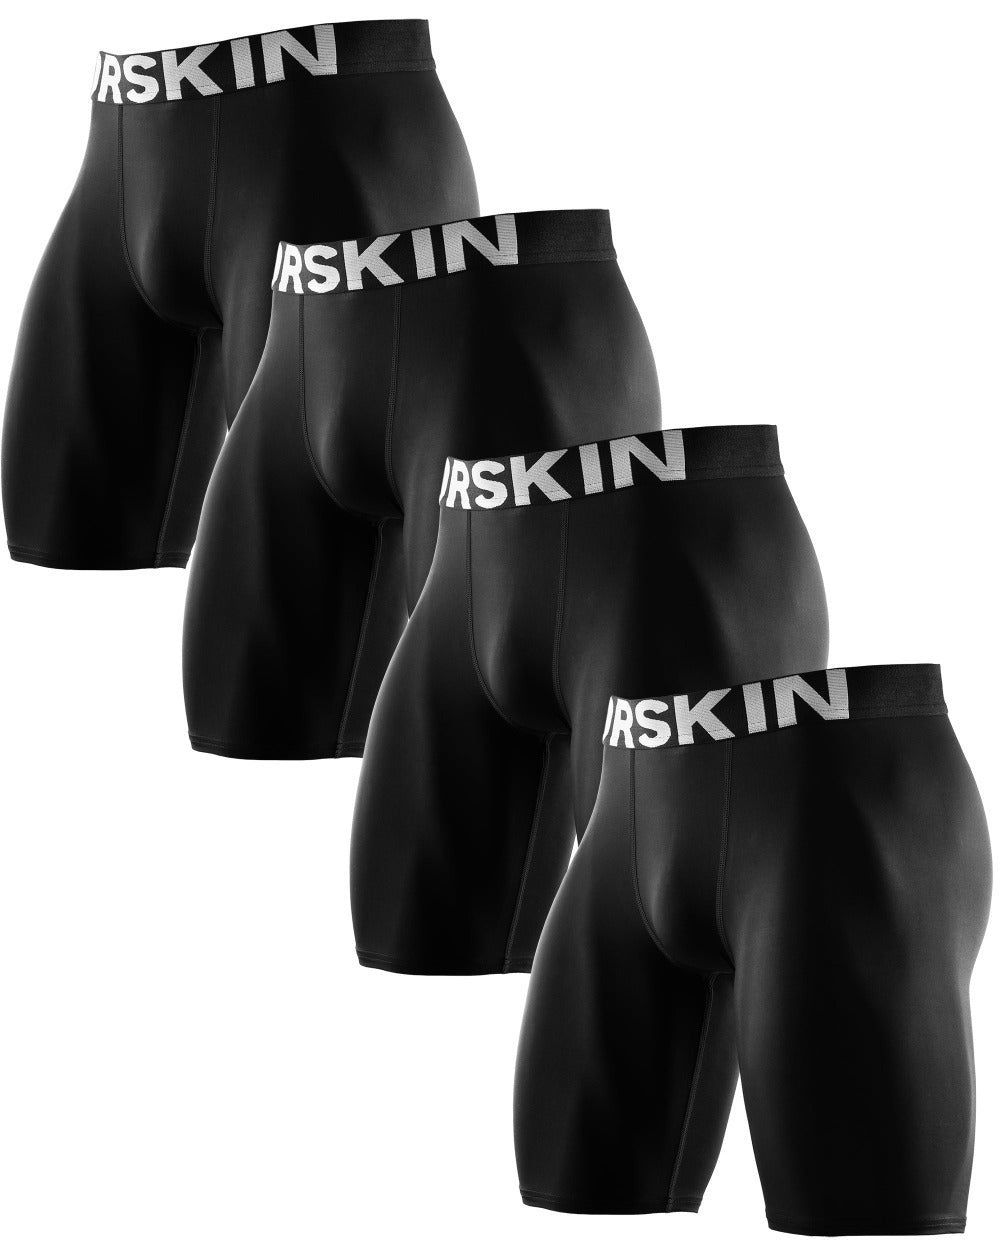 GetUSCart- DRSKIN Men?s Compression Pants Dry Cool Sports